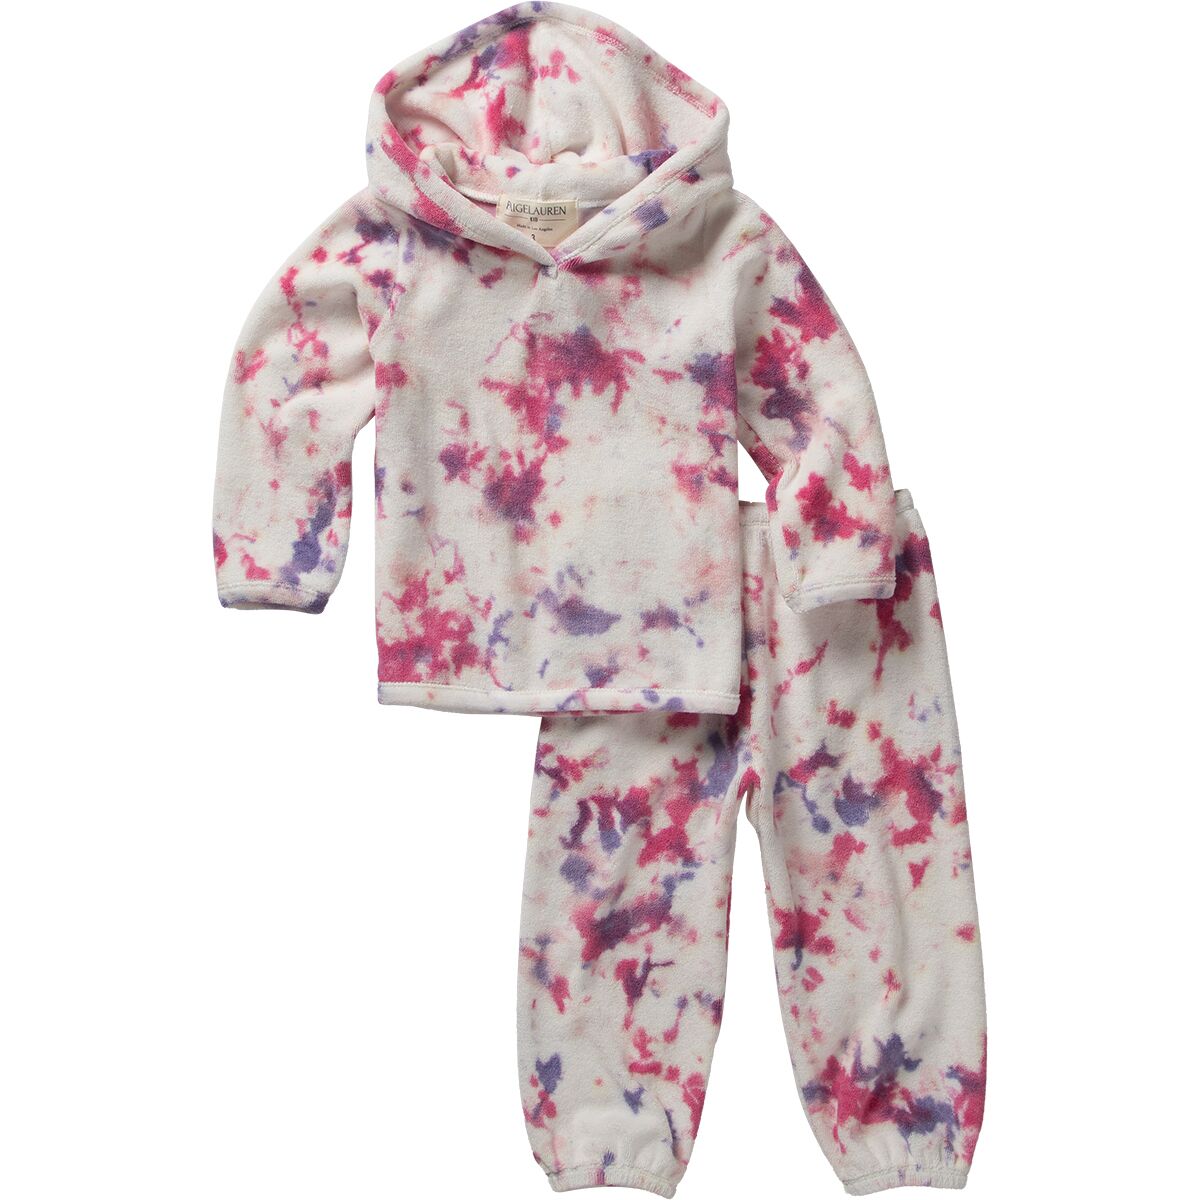 PaigeLauren French Terry Hoodie and Balloon Pant Set - Infant Girls'